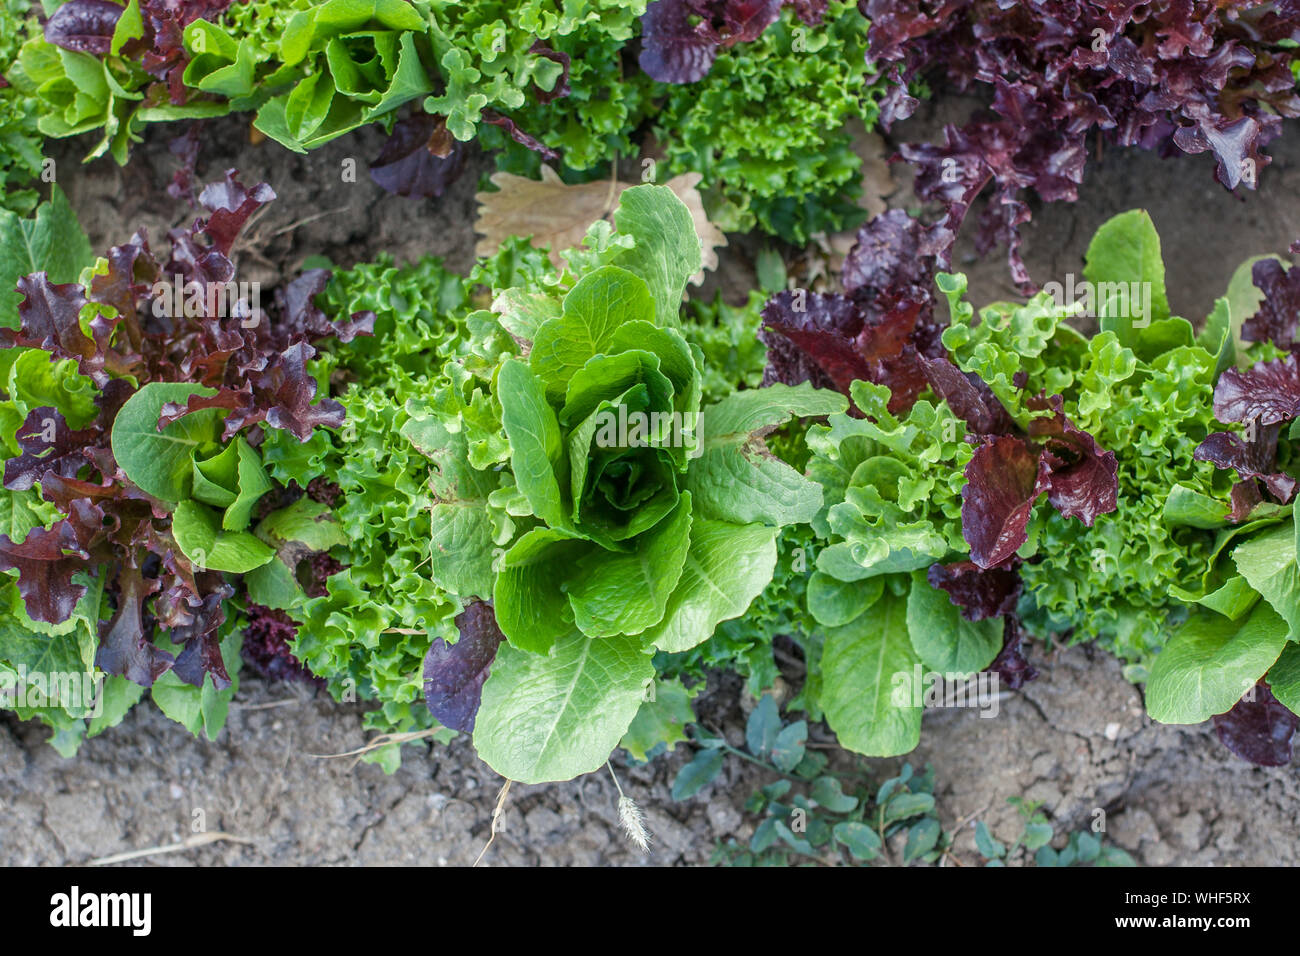 High Angle View Of Vegetables Growing Oudoors Stock Photo